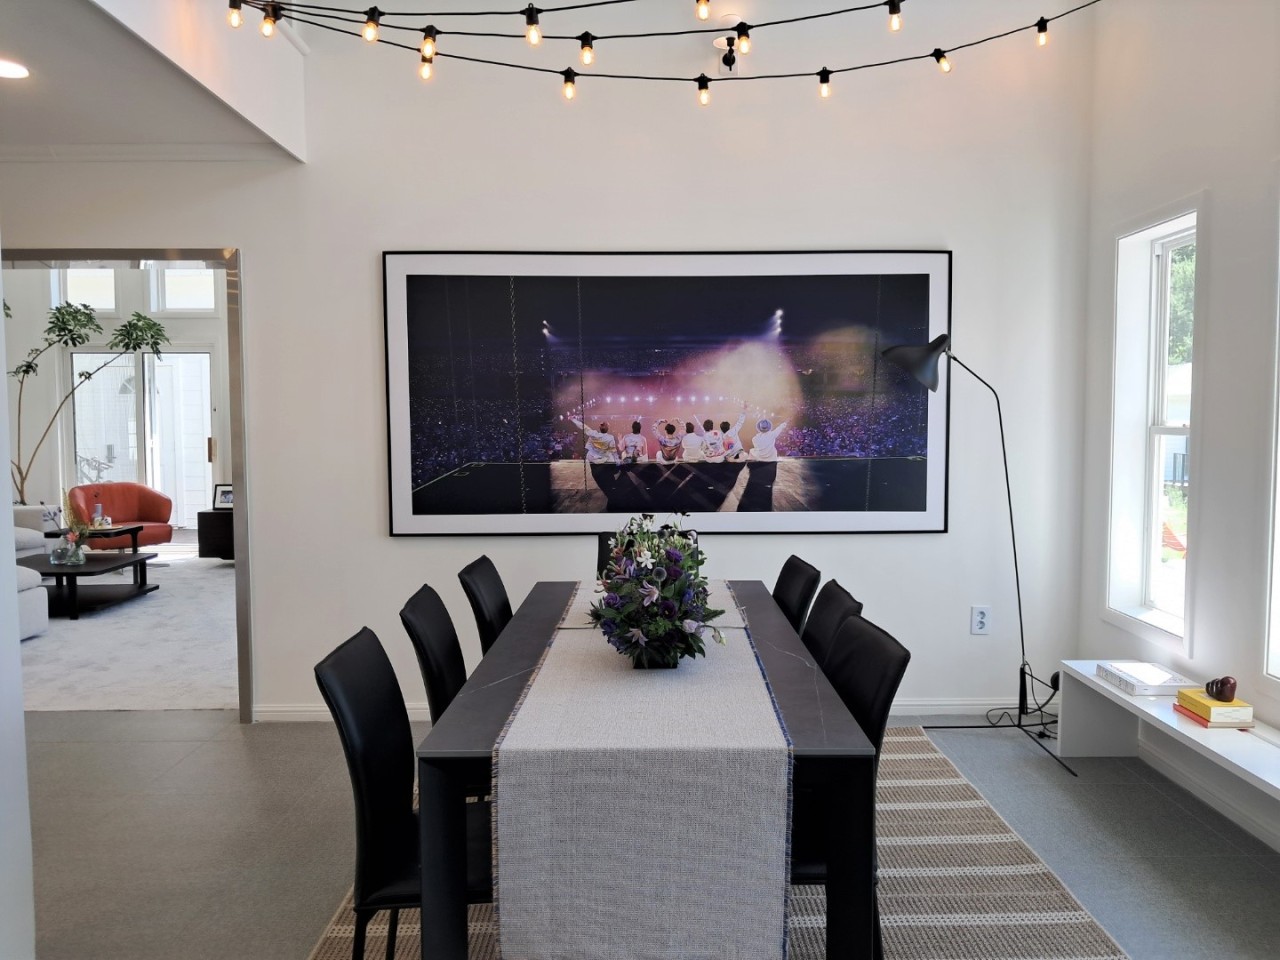 The dining room featured in BTS In The Soop (Lee Si-jin/The Korea Herald)